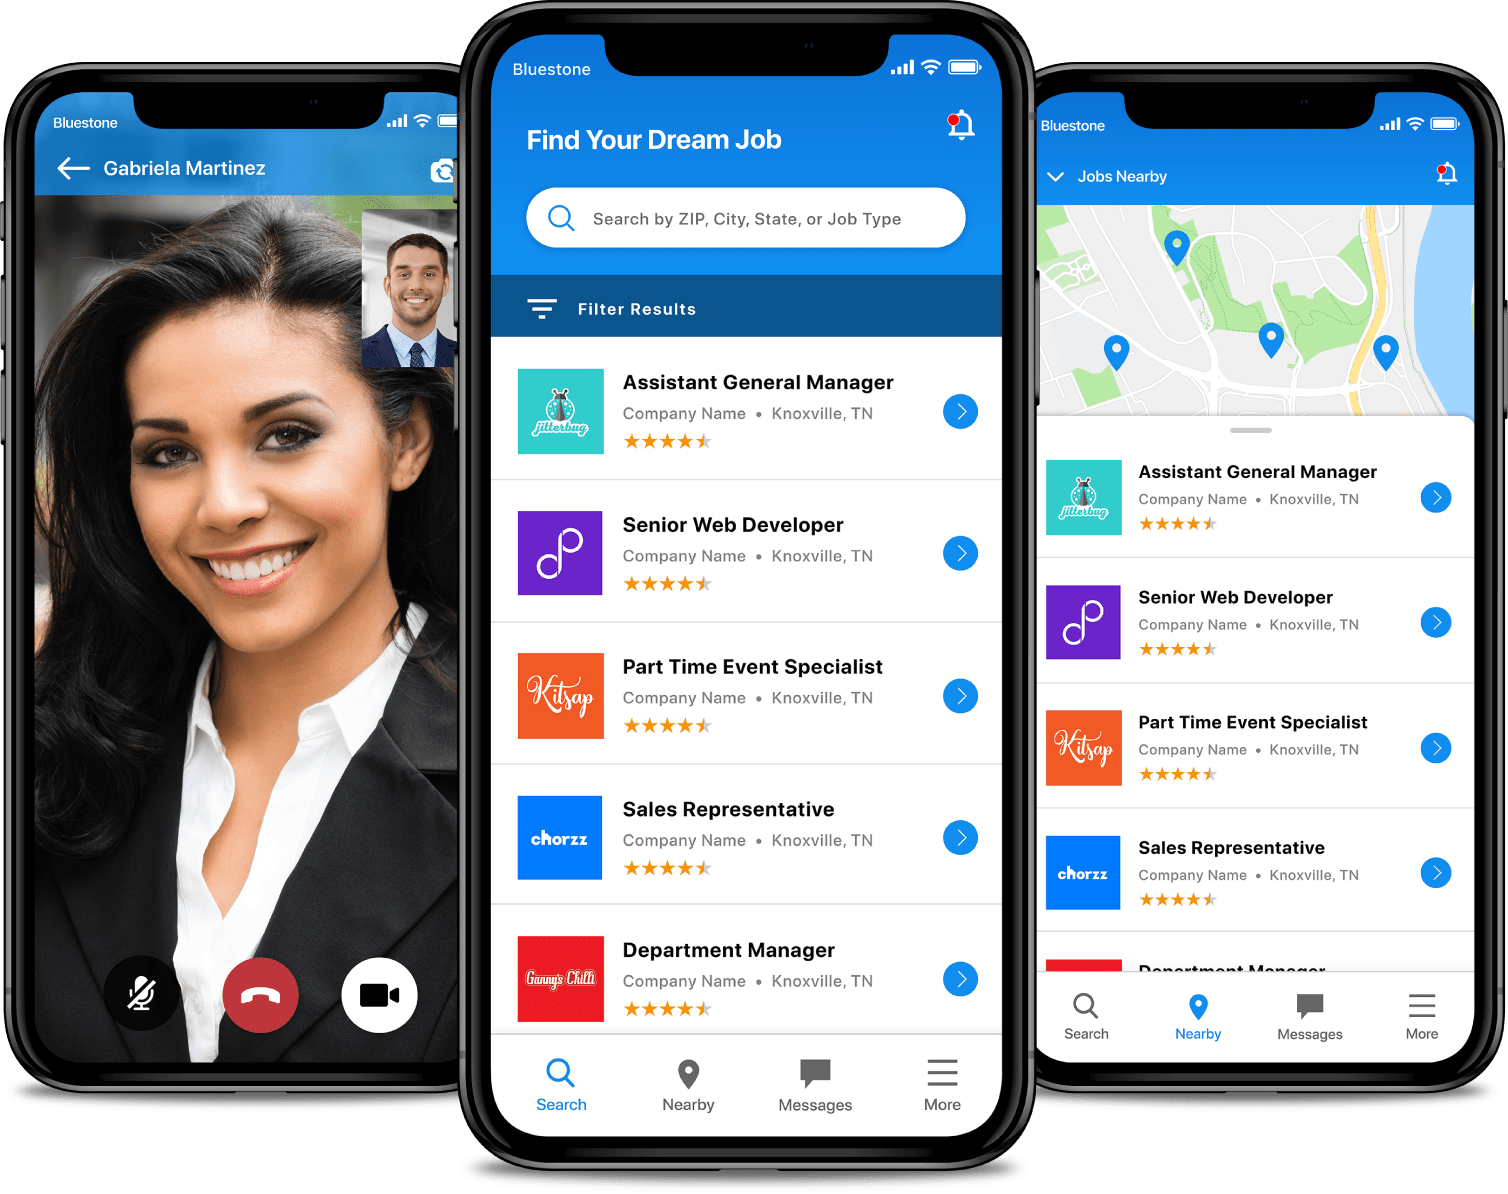 App screens show Jobs Map, Applicant Profile, and Find Jobs app features on an iPhone X.